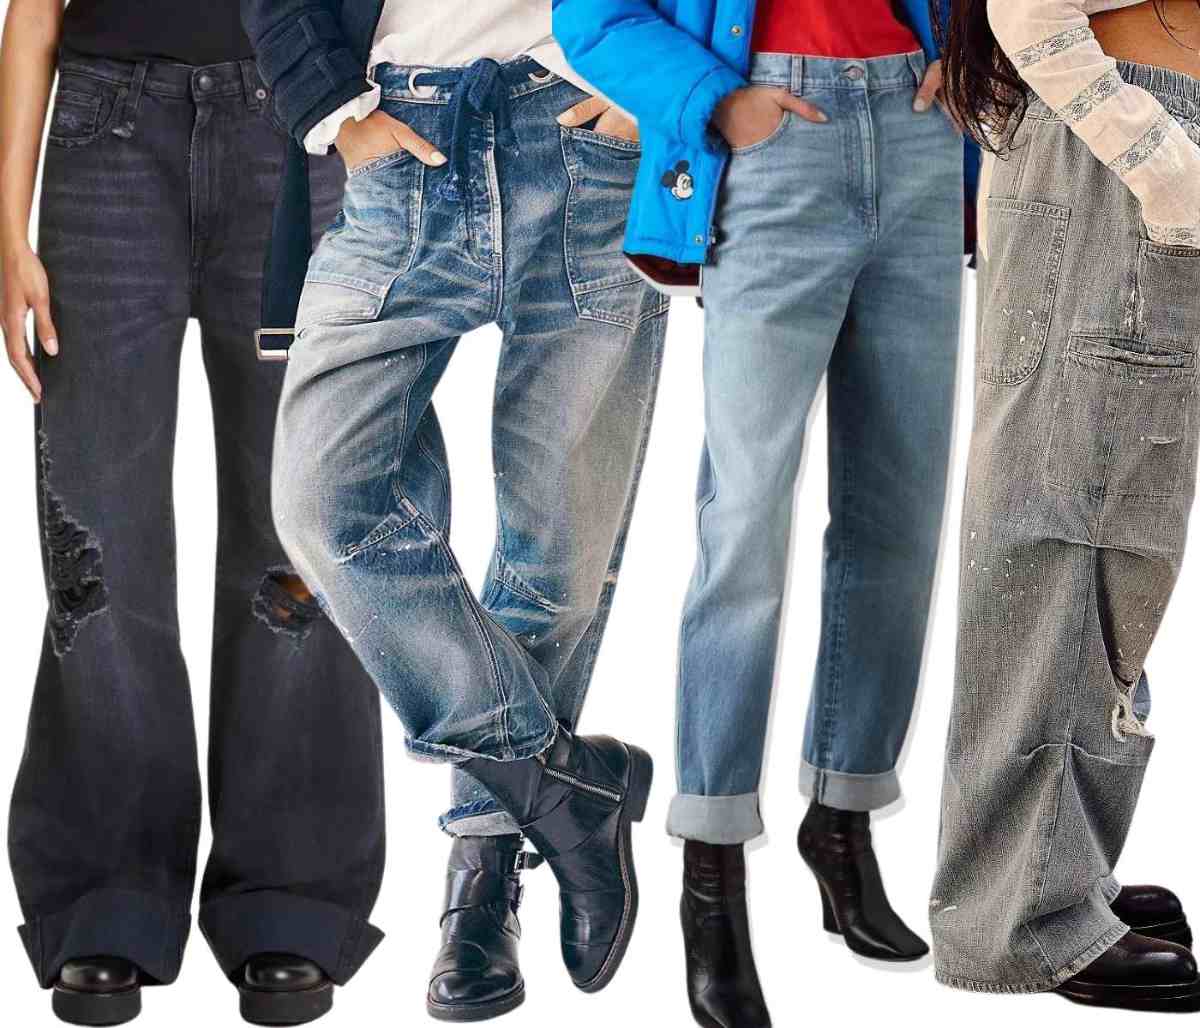 Collage of cropped view of 4 women's legs wearing different ankle boots with jeans that are baggy and loose.